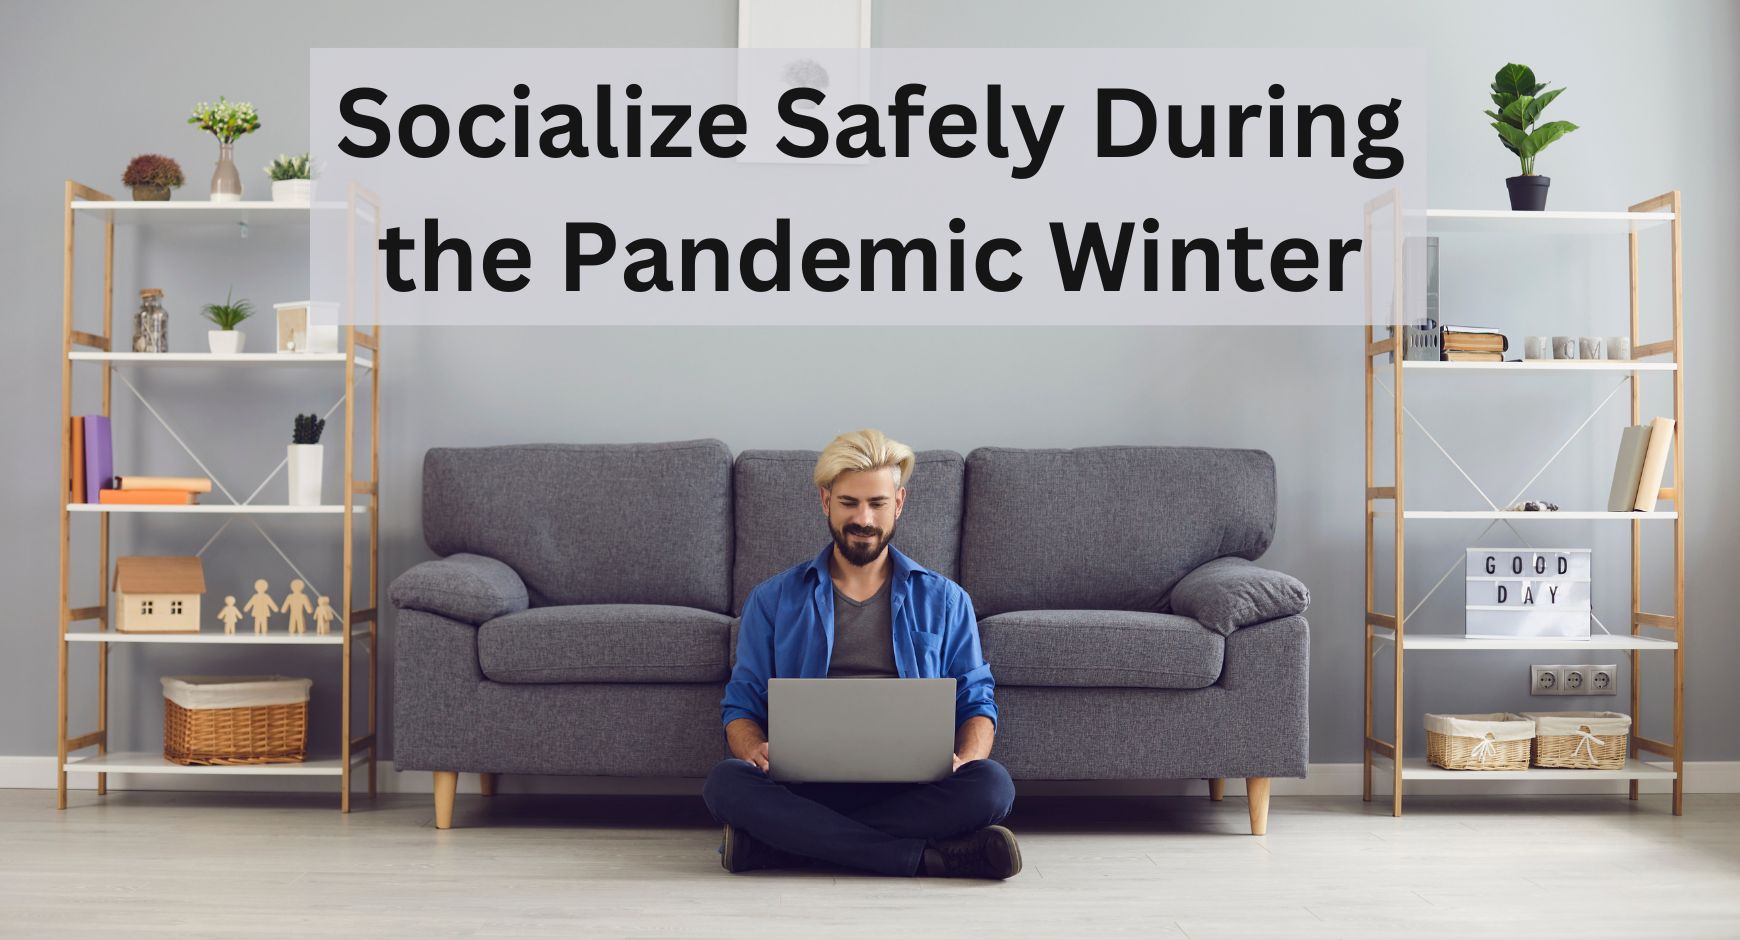 A man sitting along in his living room on a laptop under words that read "Socialize Safely During the Pandemic Winter"